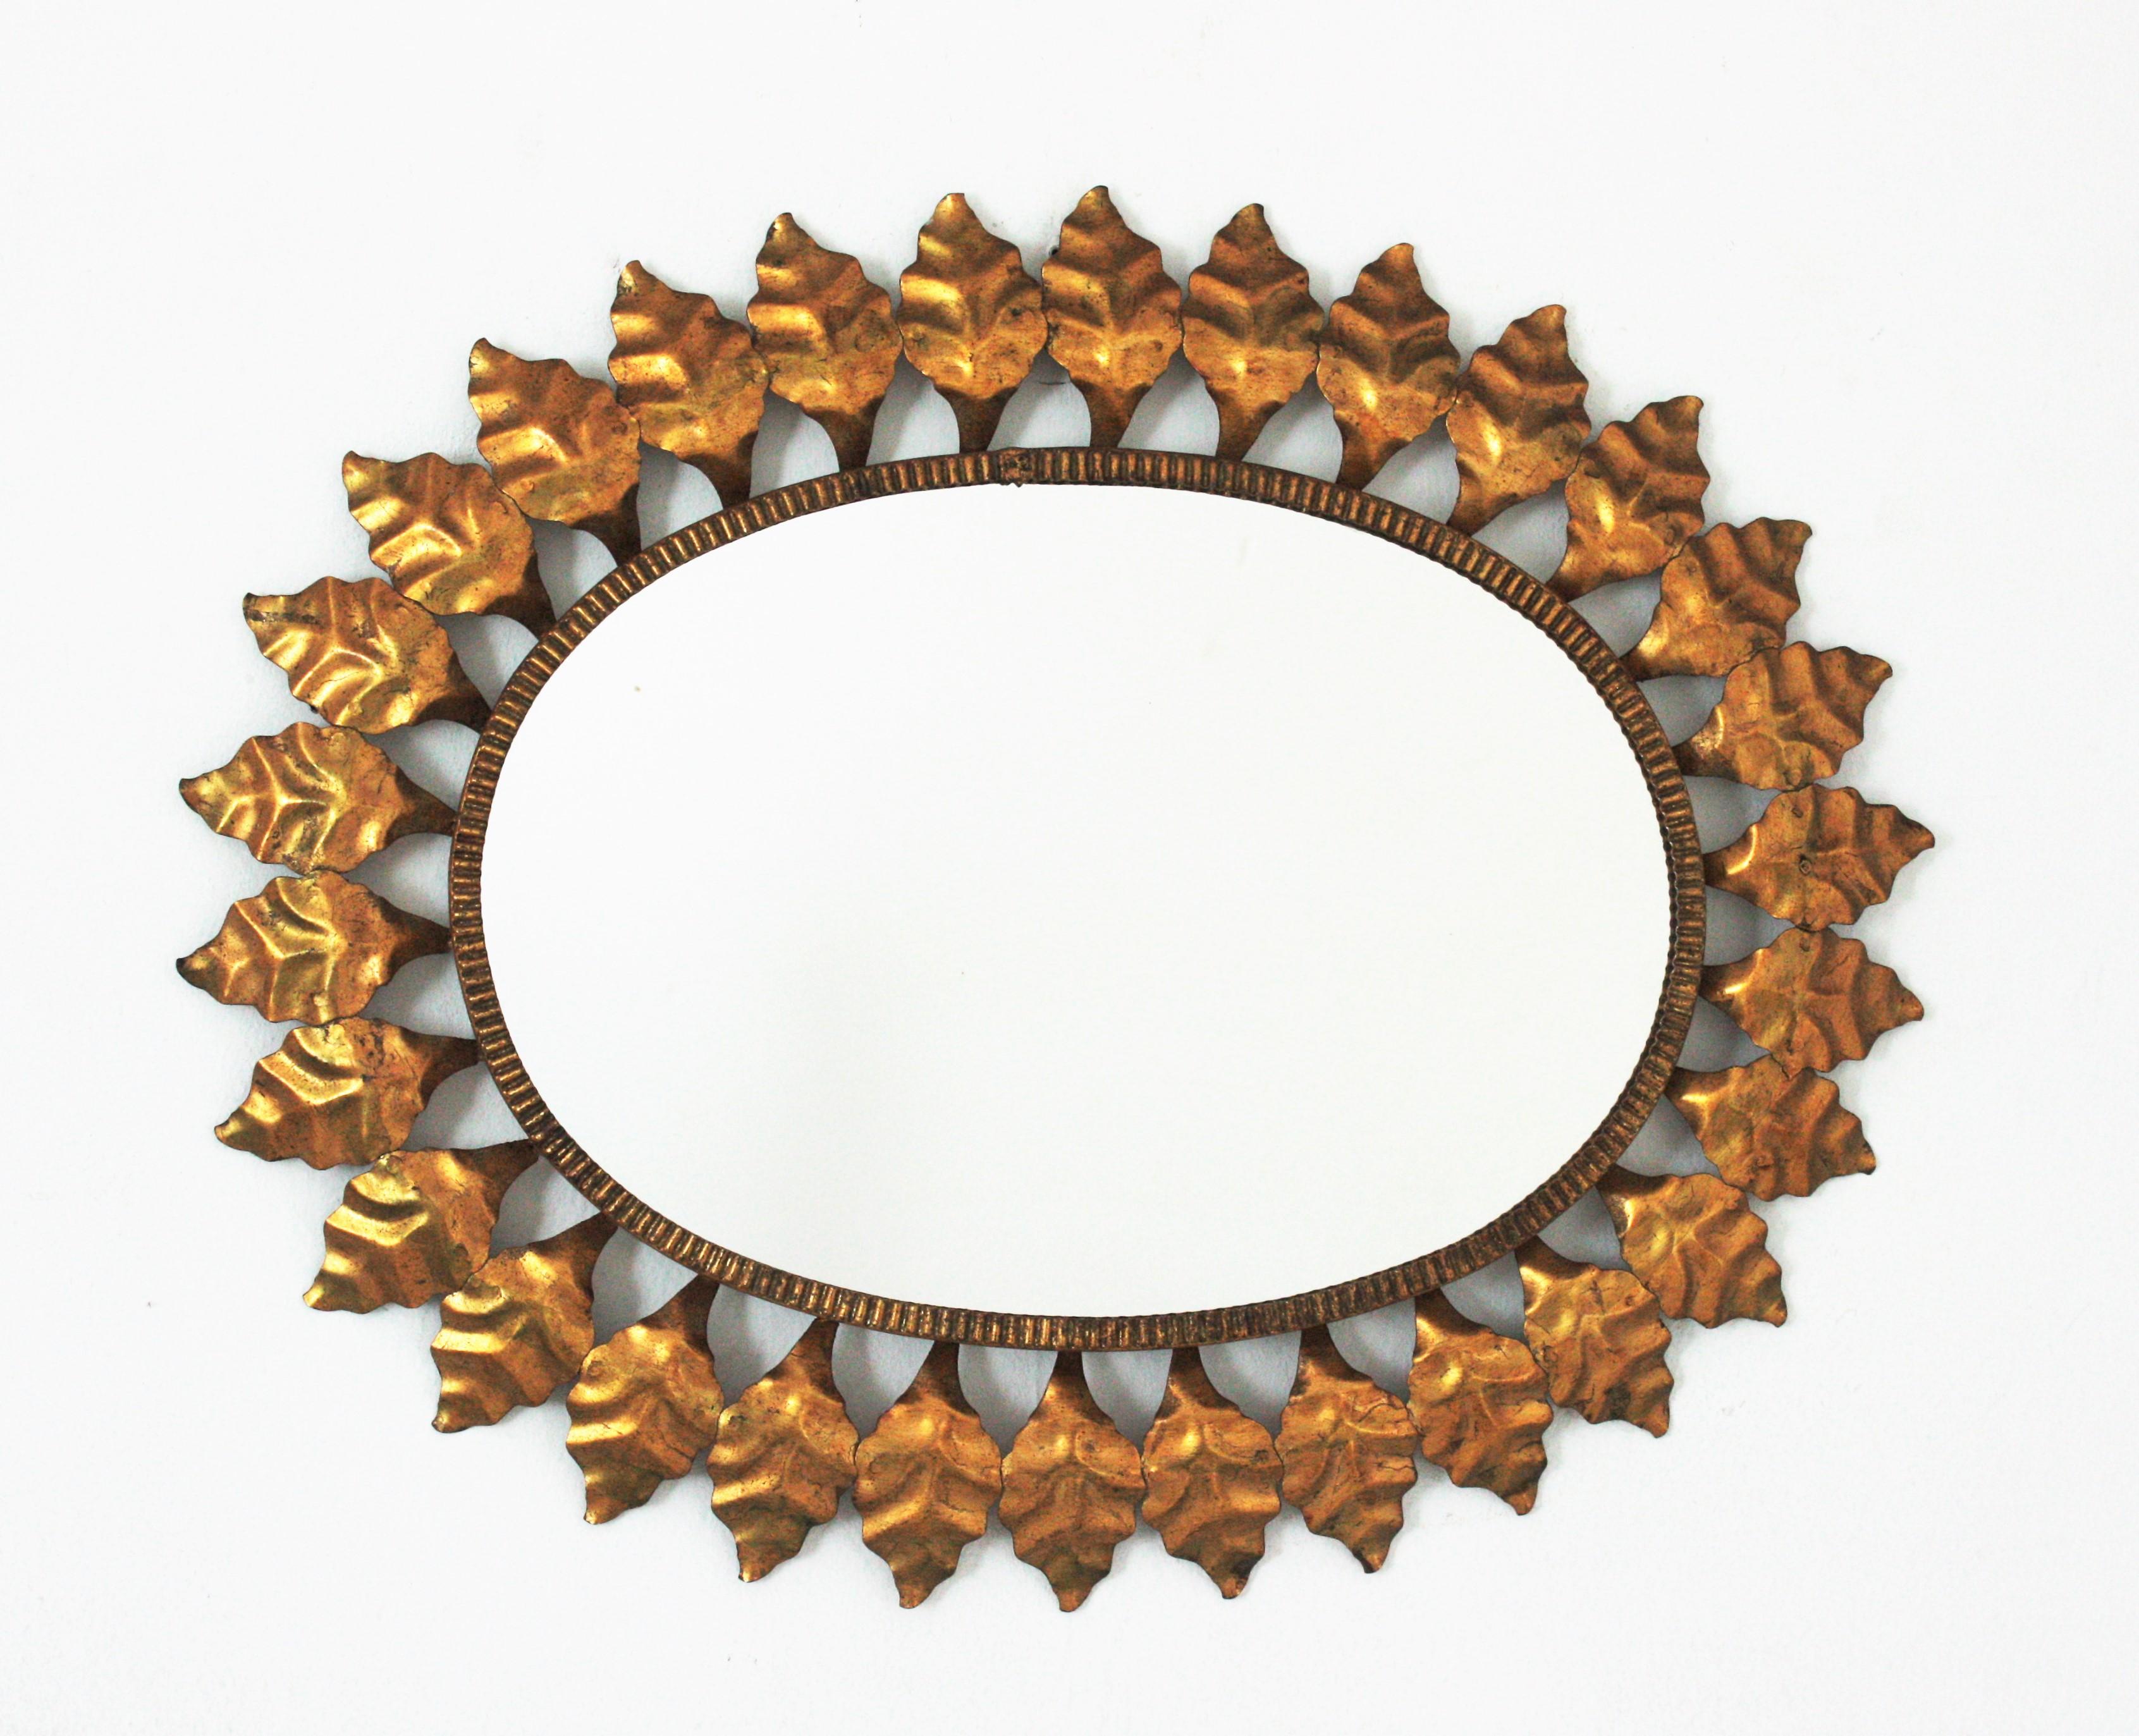 Mid-Century Modern wrought iron sunburst oval wall mirror with gold leaf finish, Spain, 1950s.
This highly decorative leafed sunburst gilt iron mirror has a nice color. It has terrific aged patina showing its original gold leaf gilding.
A great